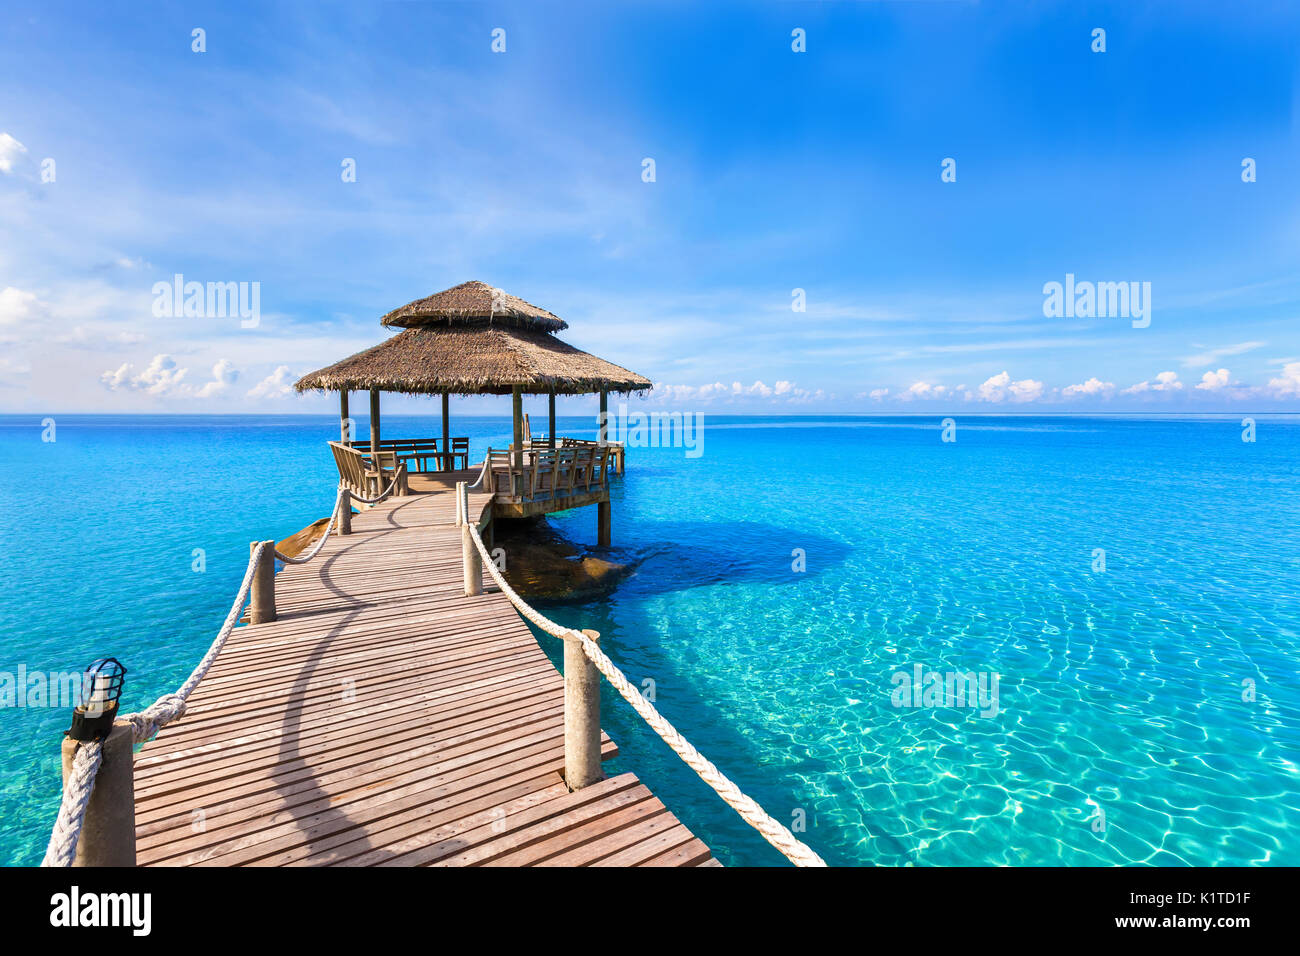 Beautiful tropical summer beach landscape, luxurious hotel wooden pier with transparent turquoise sea water Stock Photo